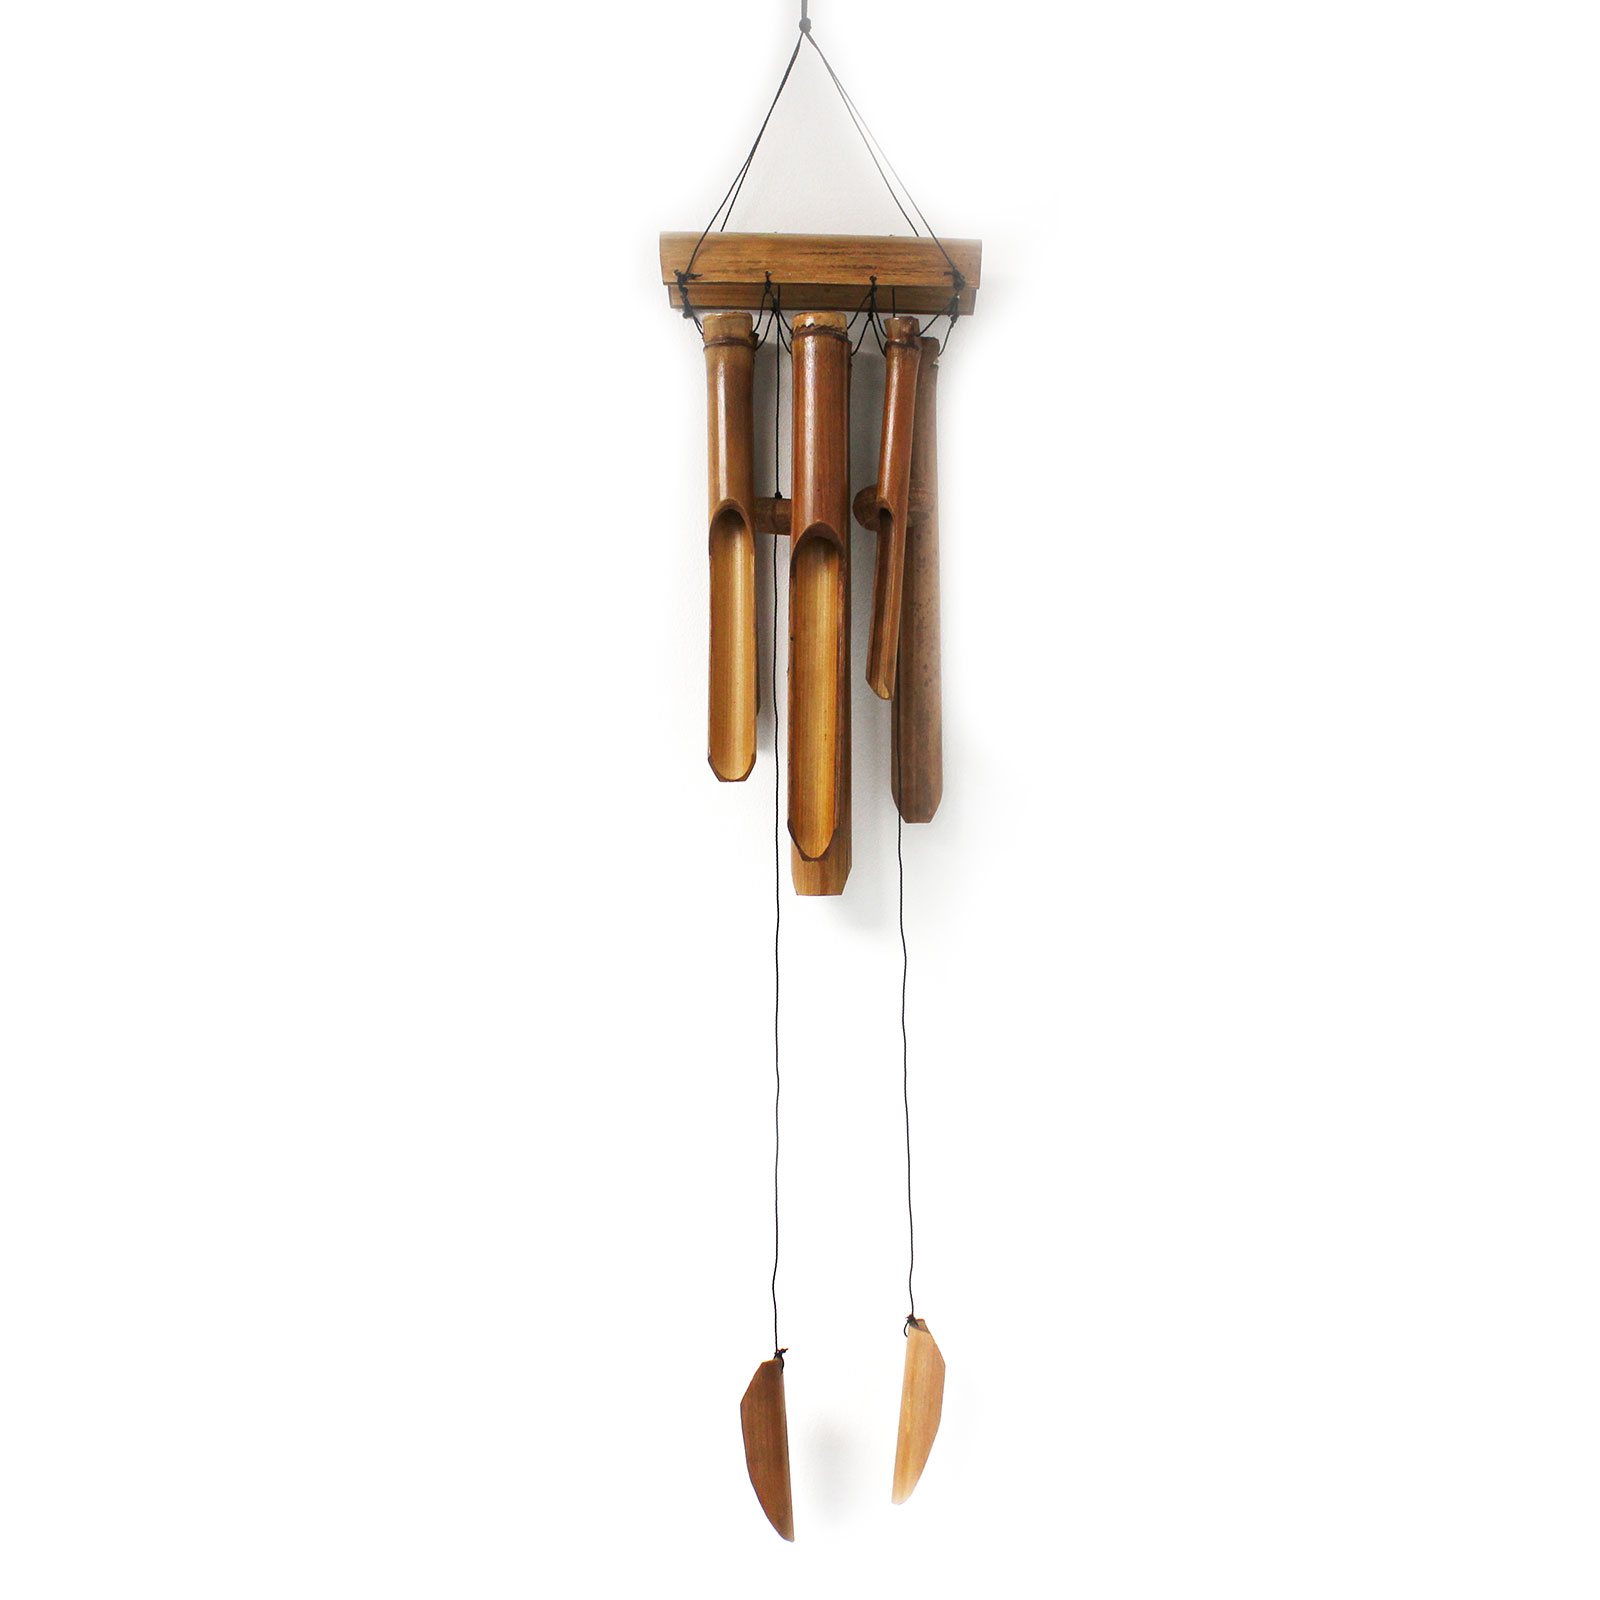 Bamboo Wind Chimes Natural Finish - 6 Tubes - Large